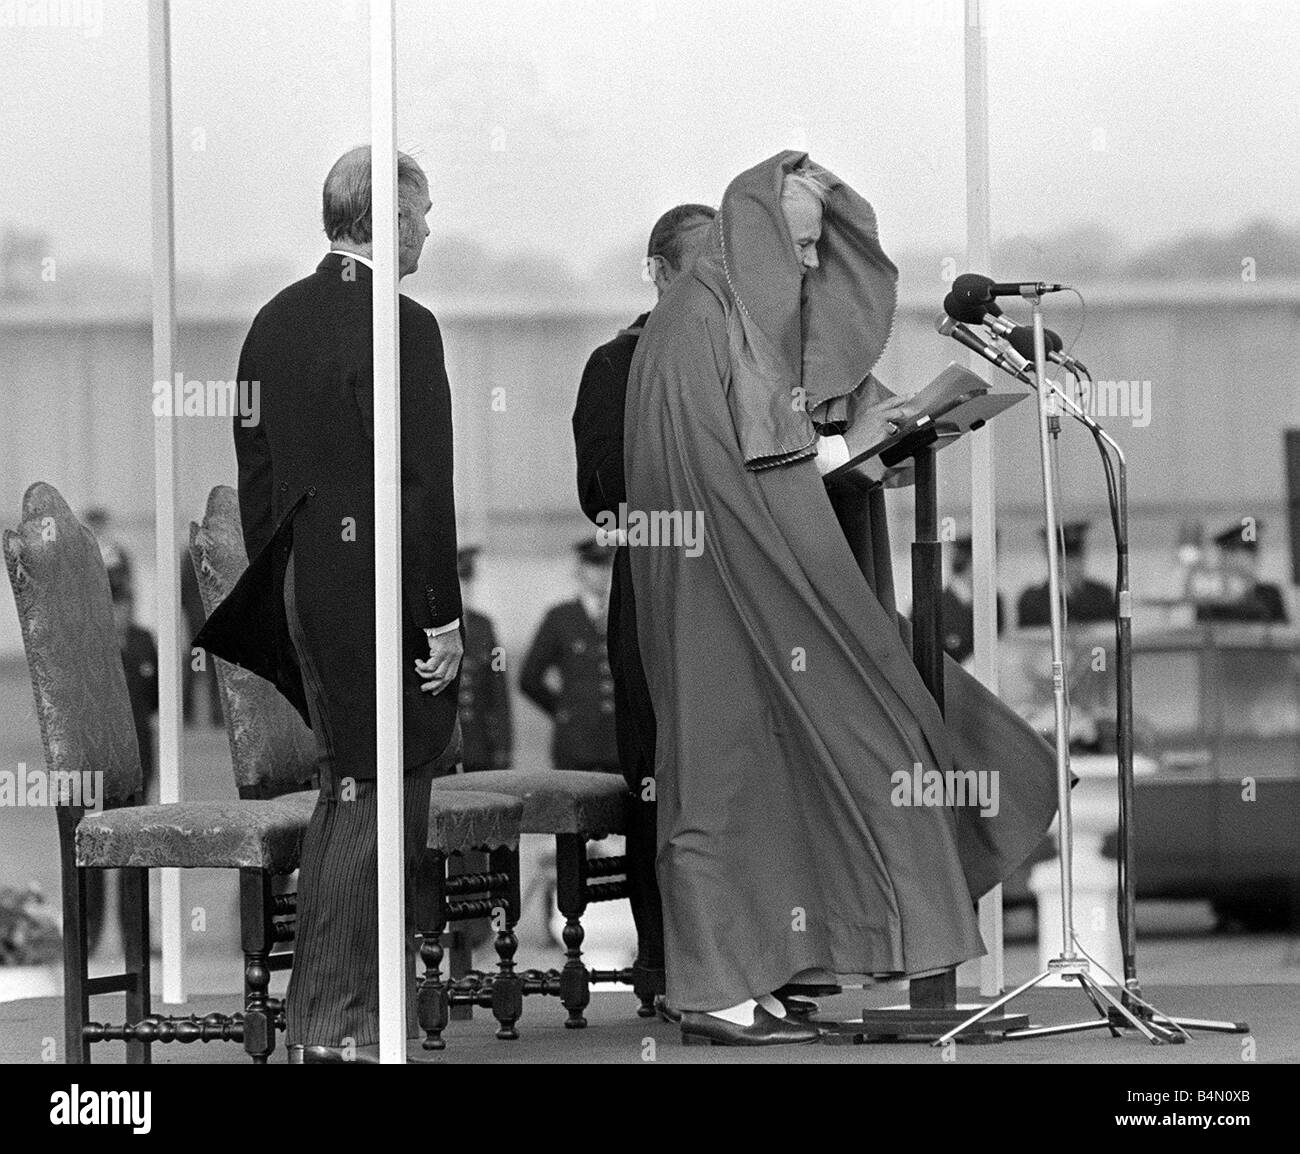 Pope John Paul II during his visit to Ireland 1979 The Pope s robe is blown over his head as he addresses his audience on his arrival in Ireland Stock Photo